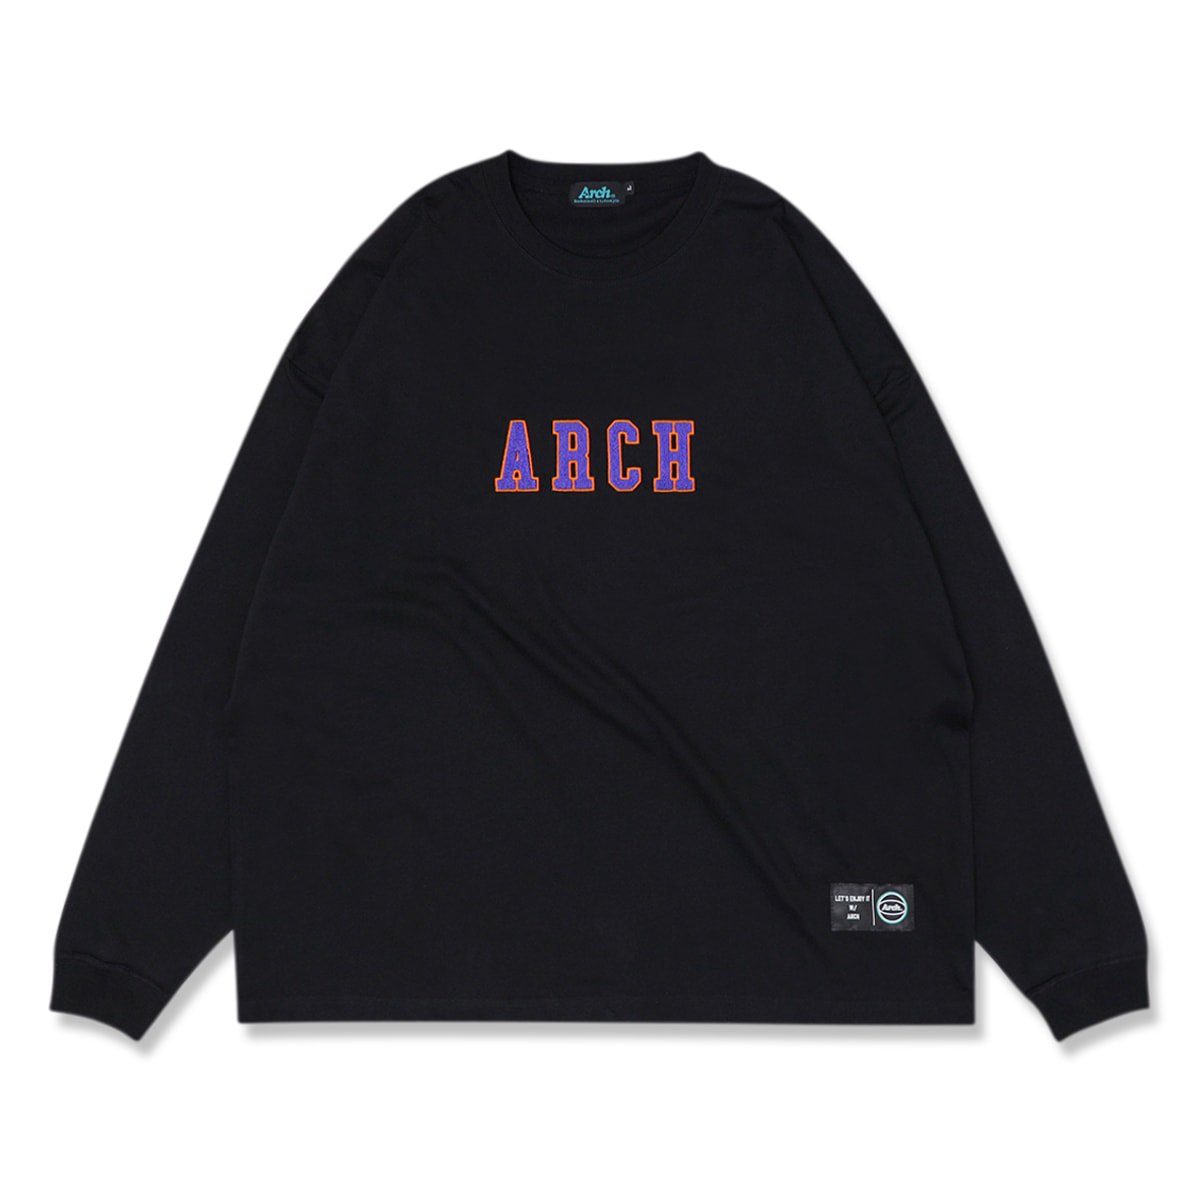 vertical embroidered wide L/S teeblack